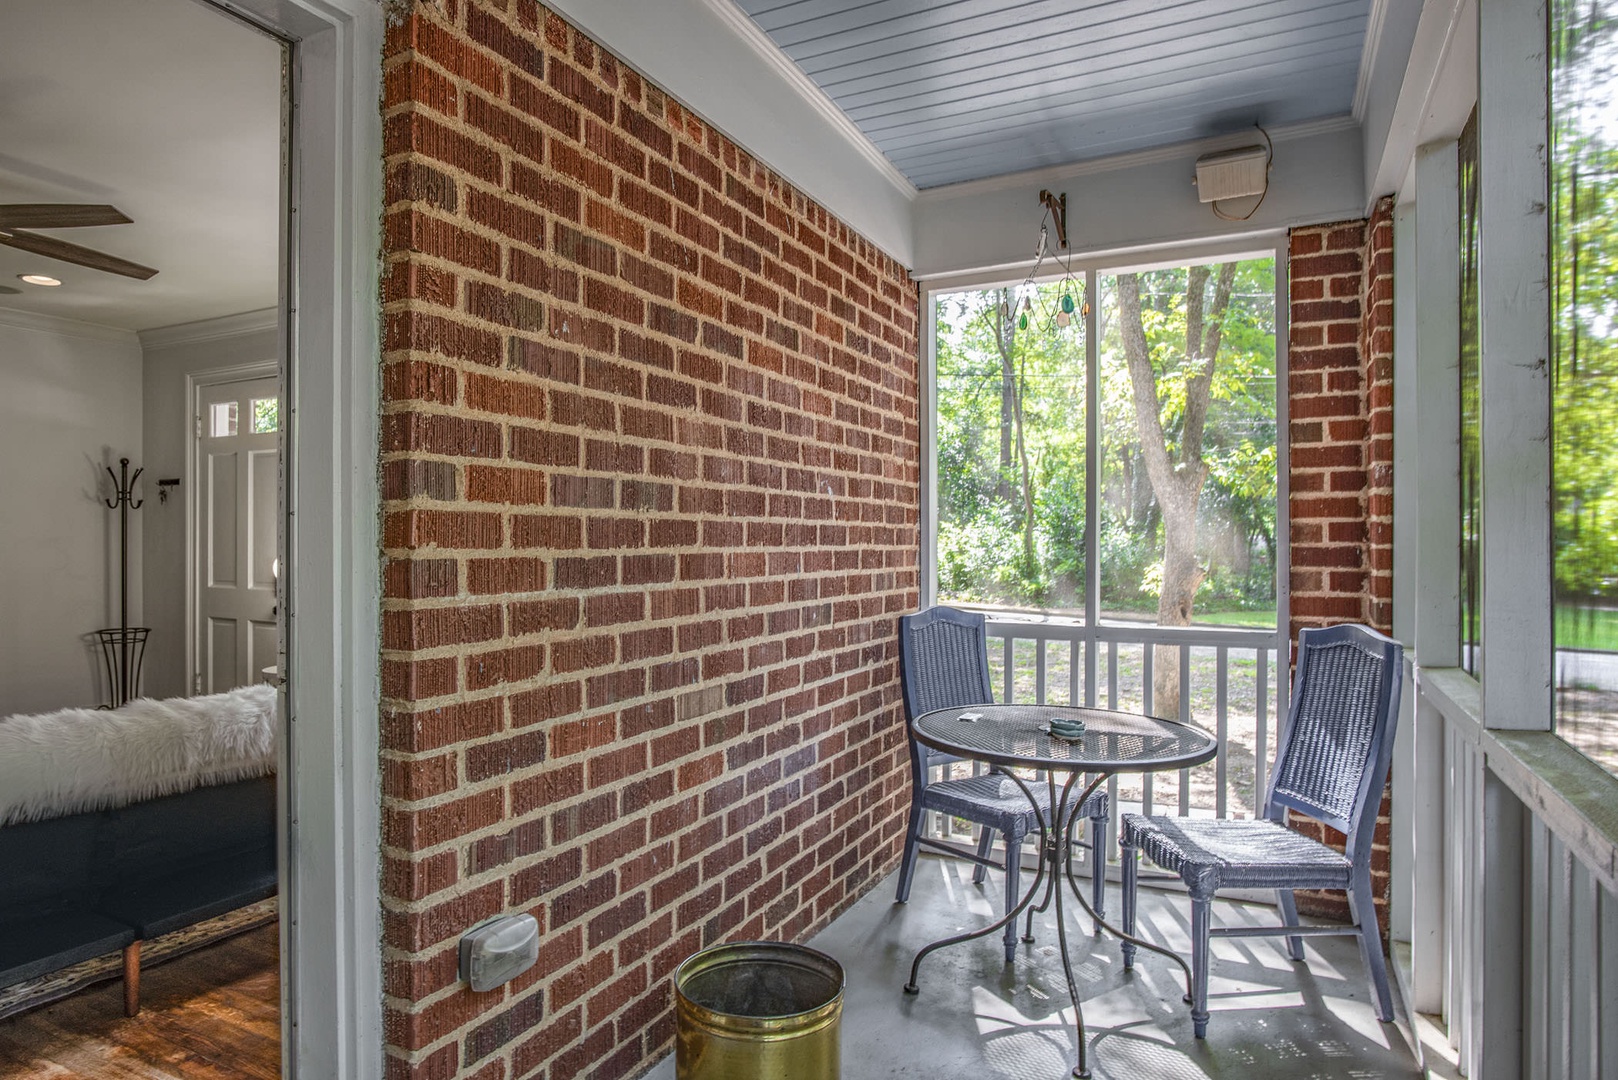 Get some fresh air out on the screened patio with seating